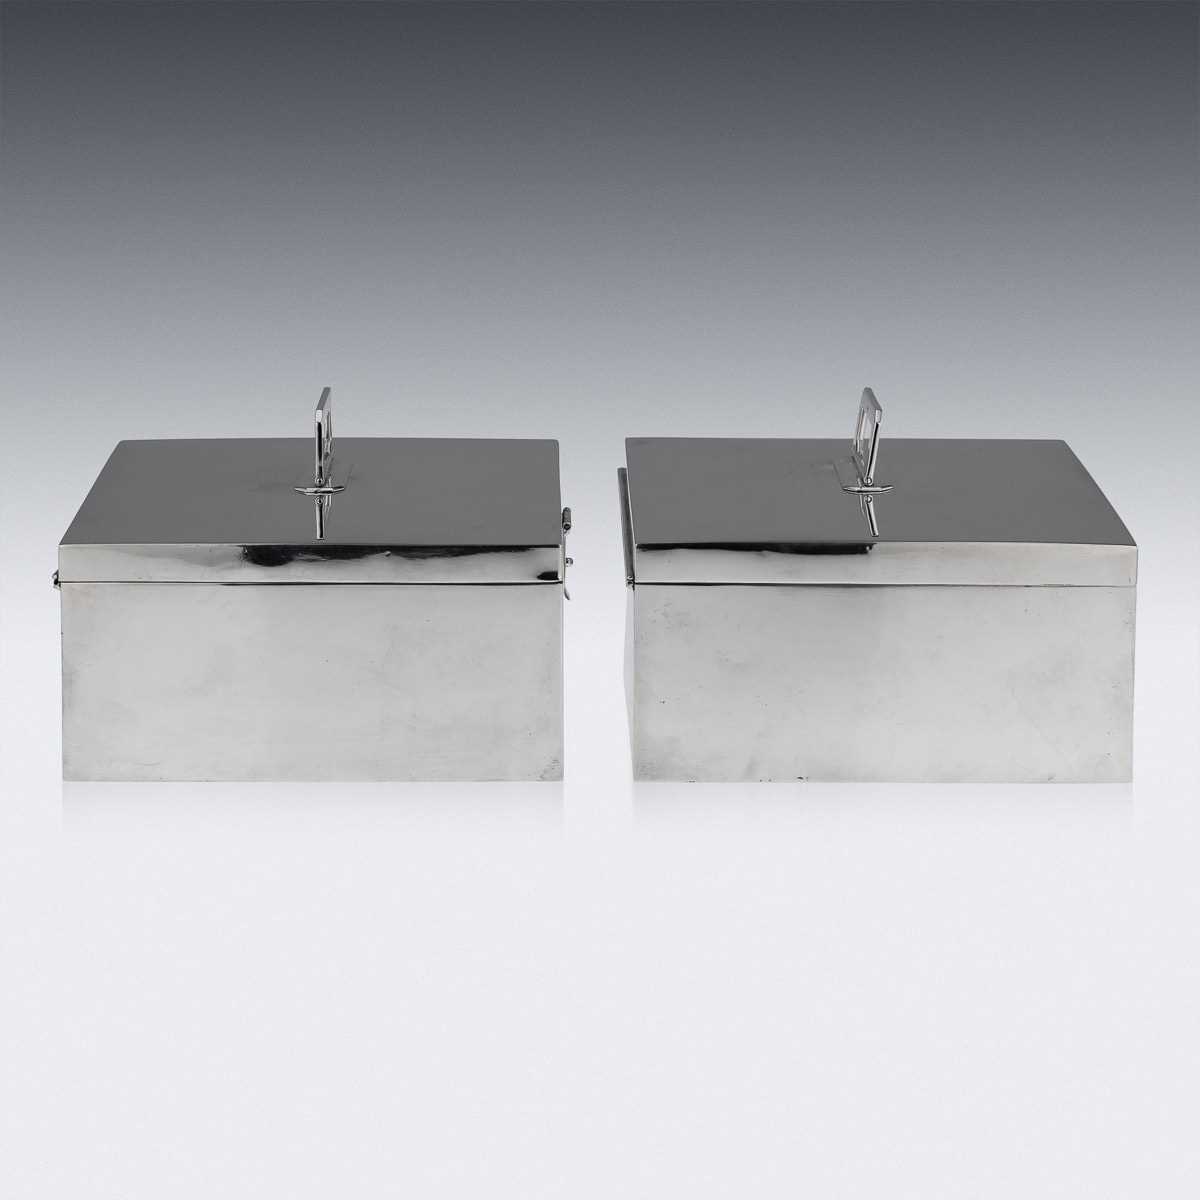 ASPREY & CO. : A PAIR OF STERLING SILVER ART DECO CIGAR BOXES, C. 1936 - Image 6 of 14